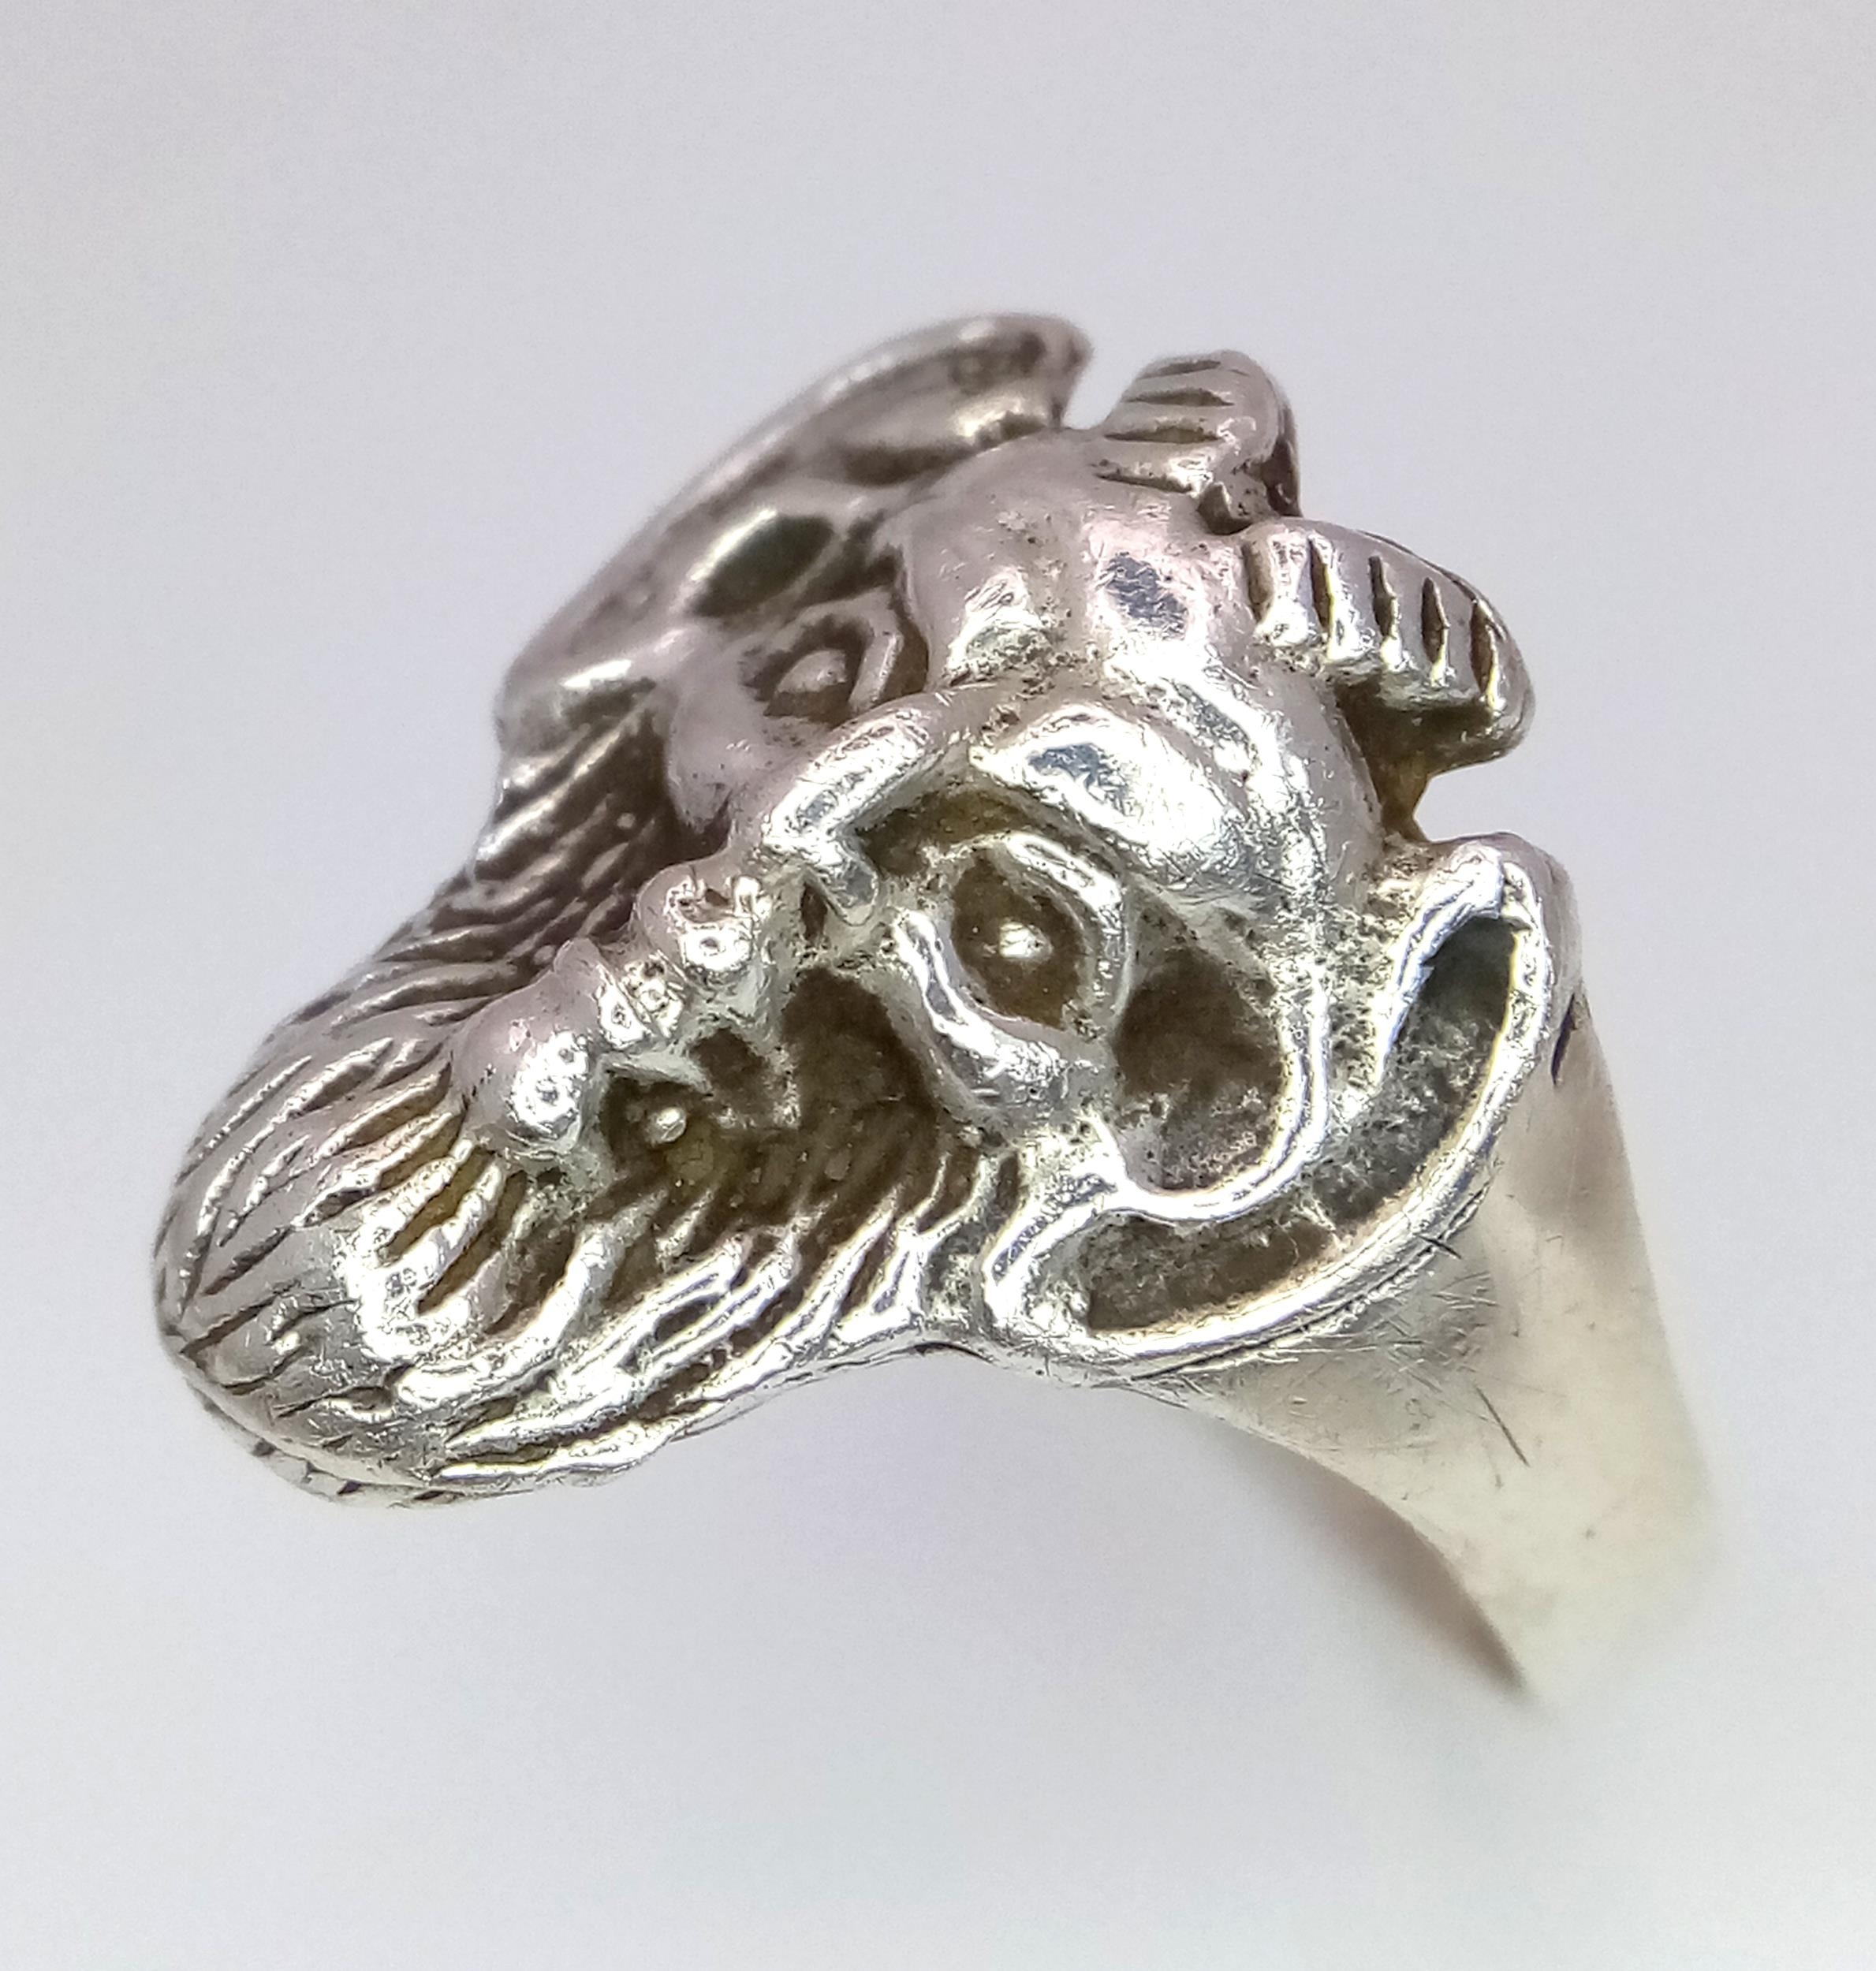 A Very Unique, Vintage or Older, Hand Crafted Grotesque Design Silver Ring Size T. Crown measures